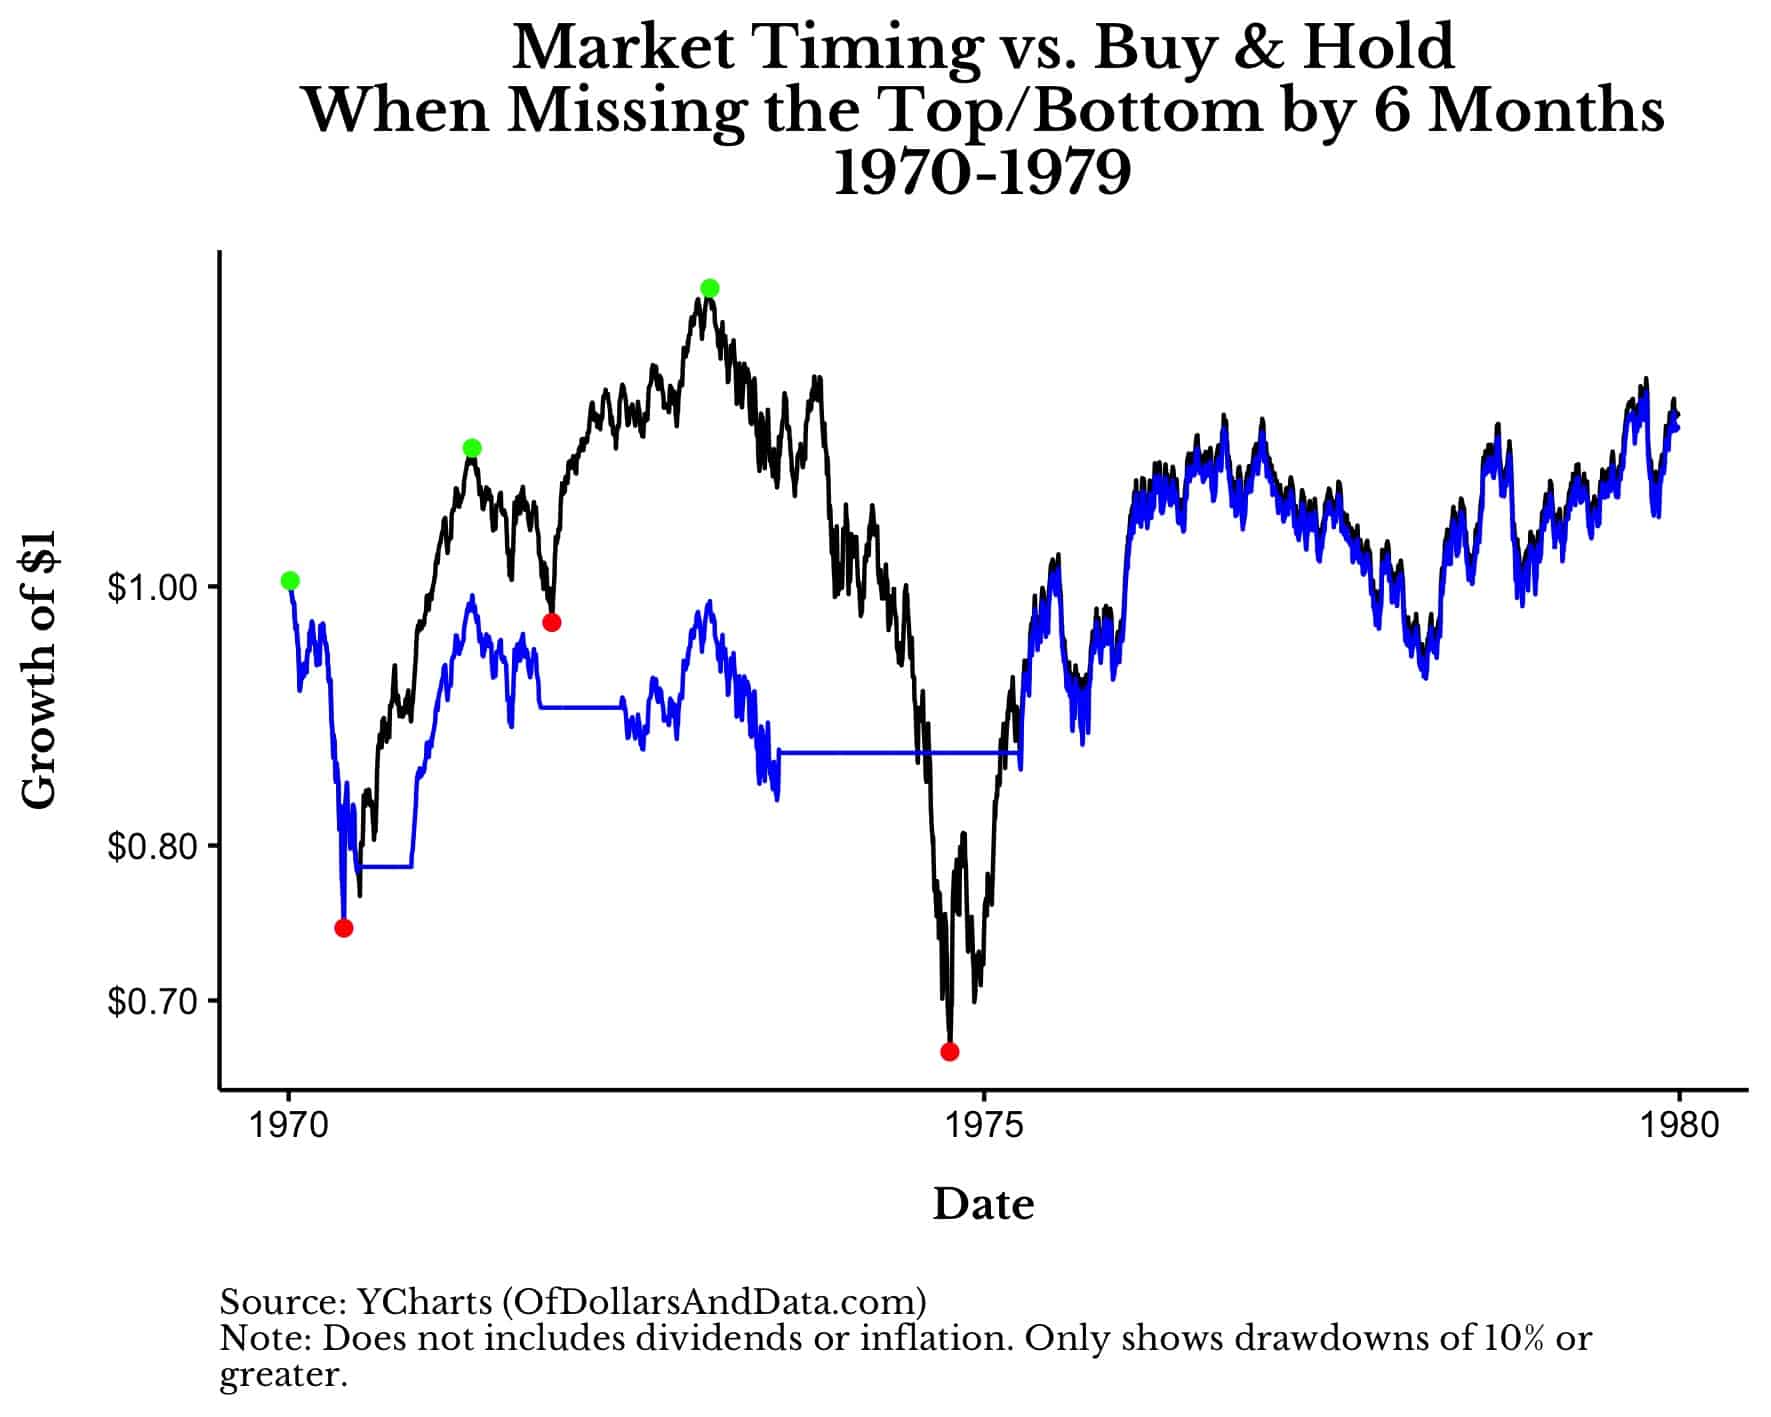 Market timing vs Buy and Hold when missing the top/bottom by 6 months, 1970-1979